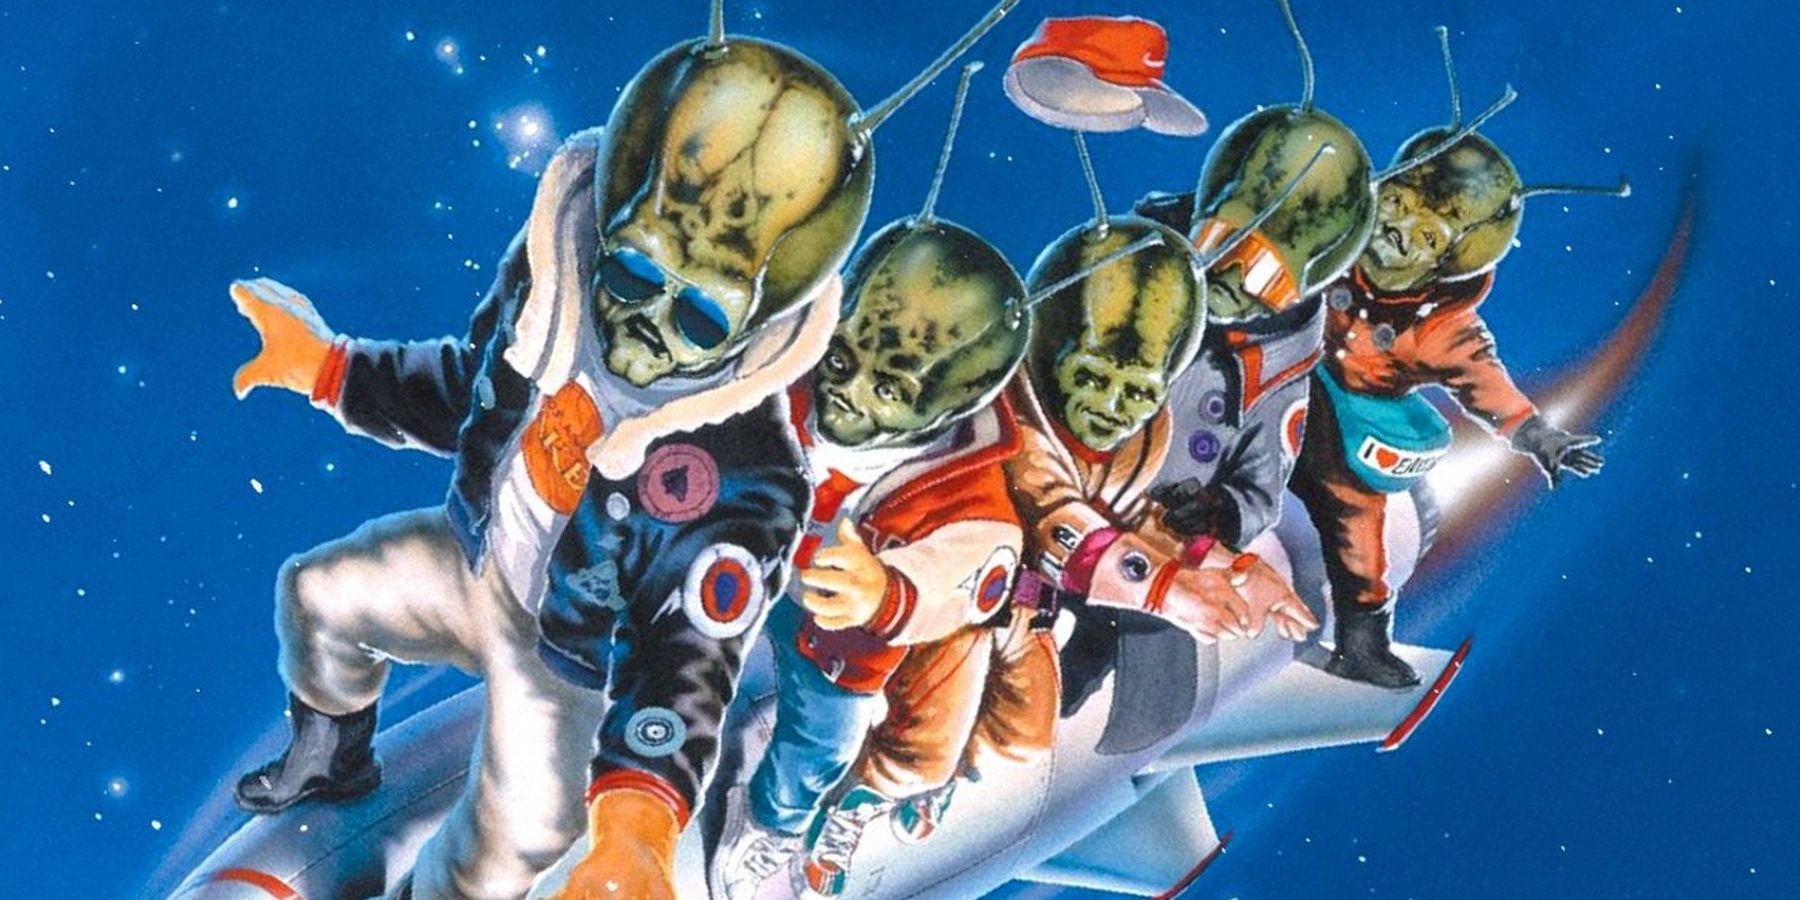 5 martians riding a rocket in Spaced Invaders